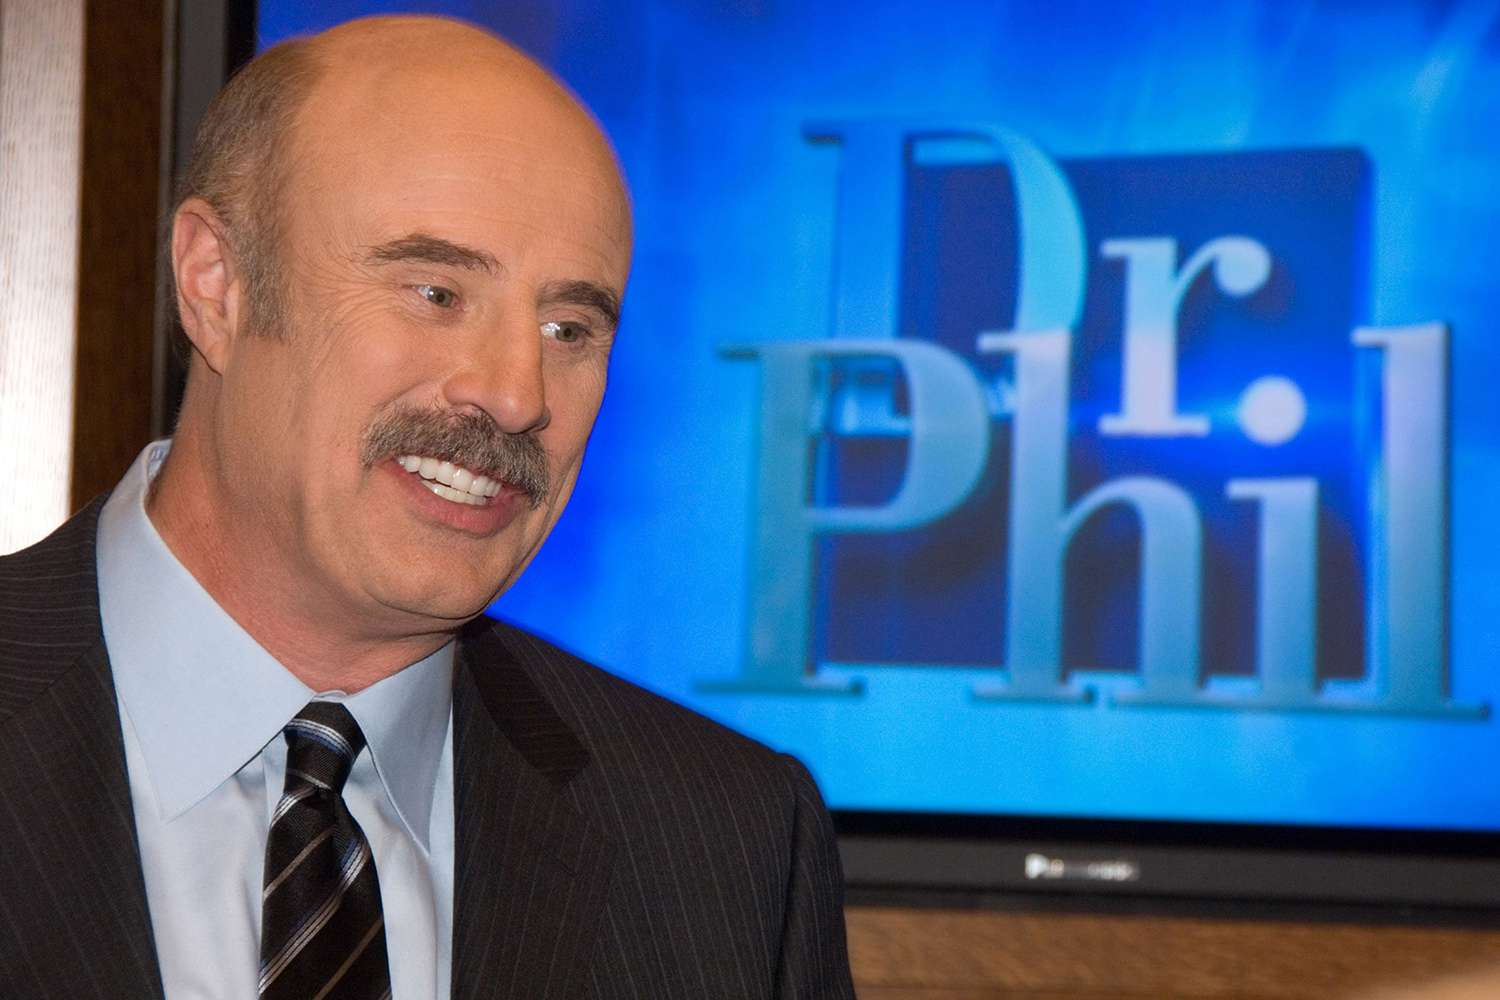 How To Watch Old Dr Phil Episodes